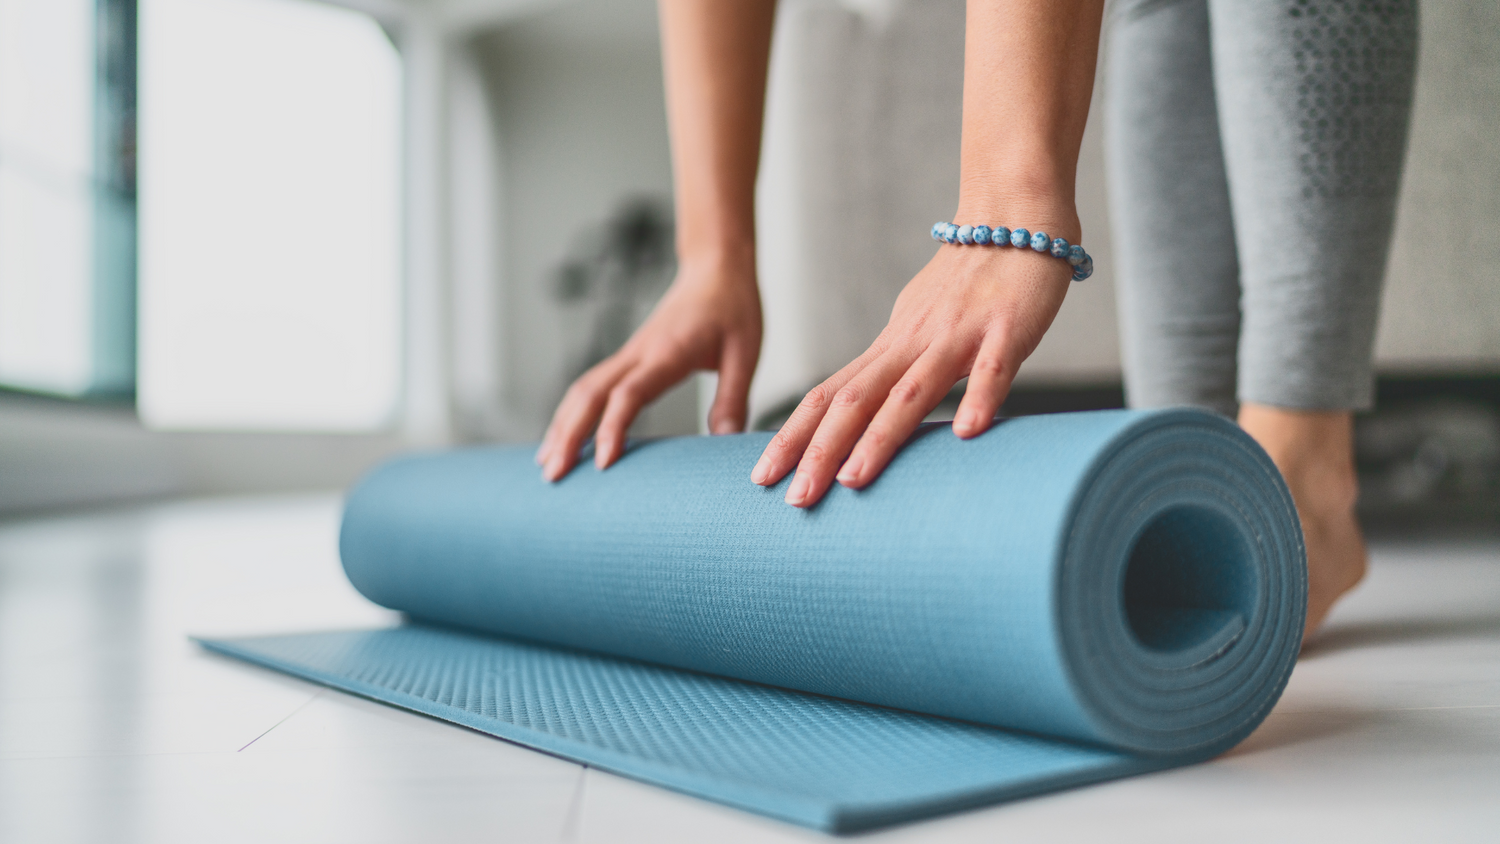 The Essential Guide to Yoga Equipment